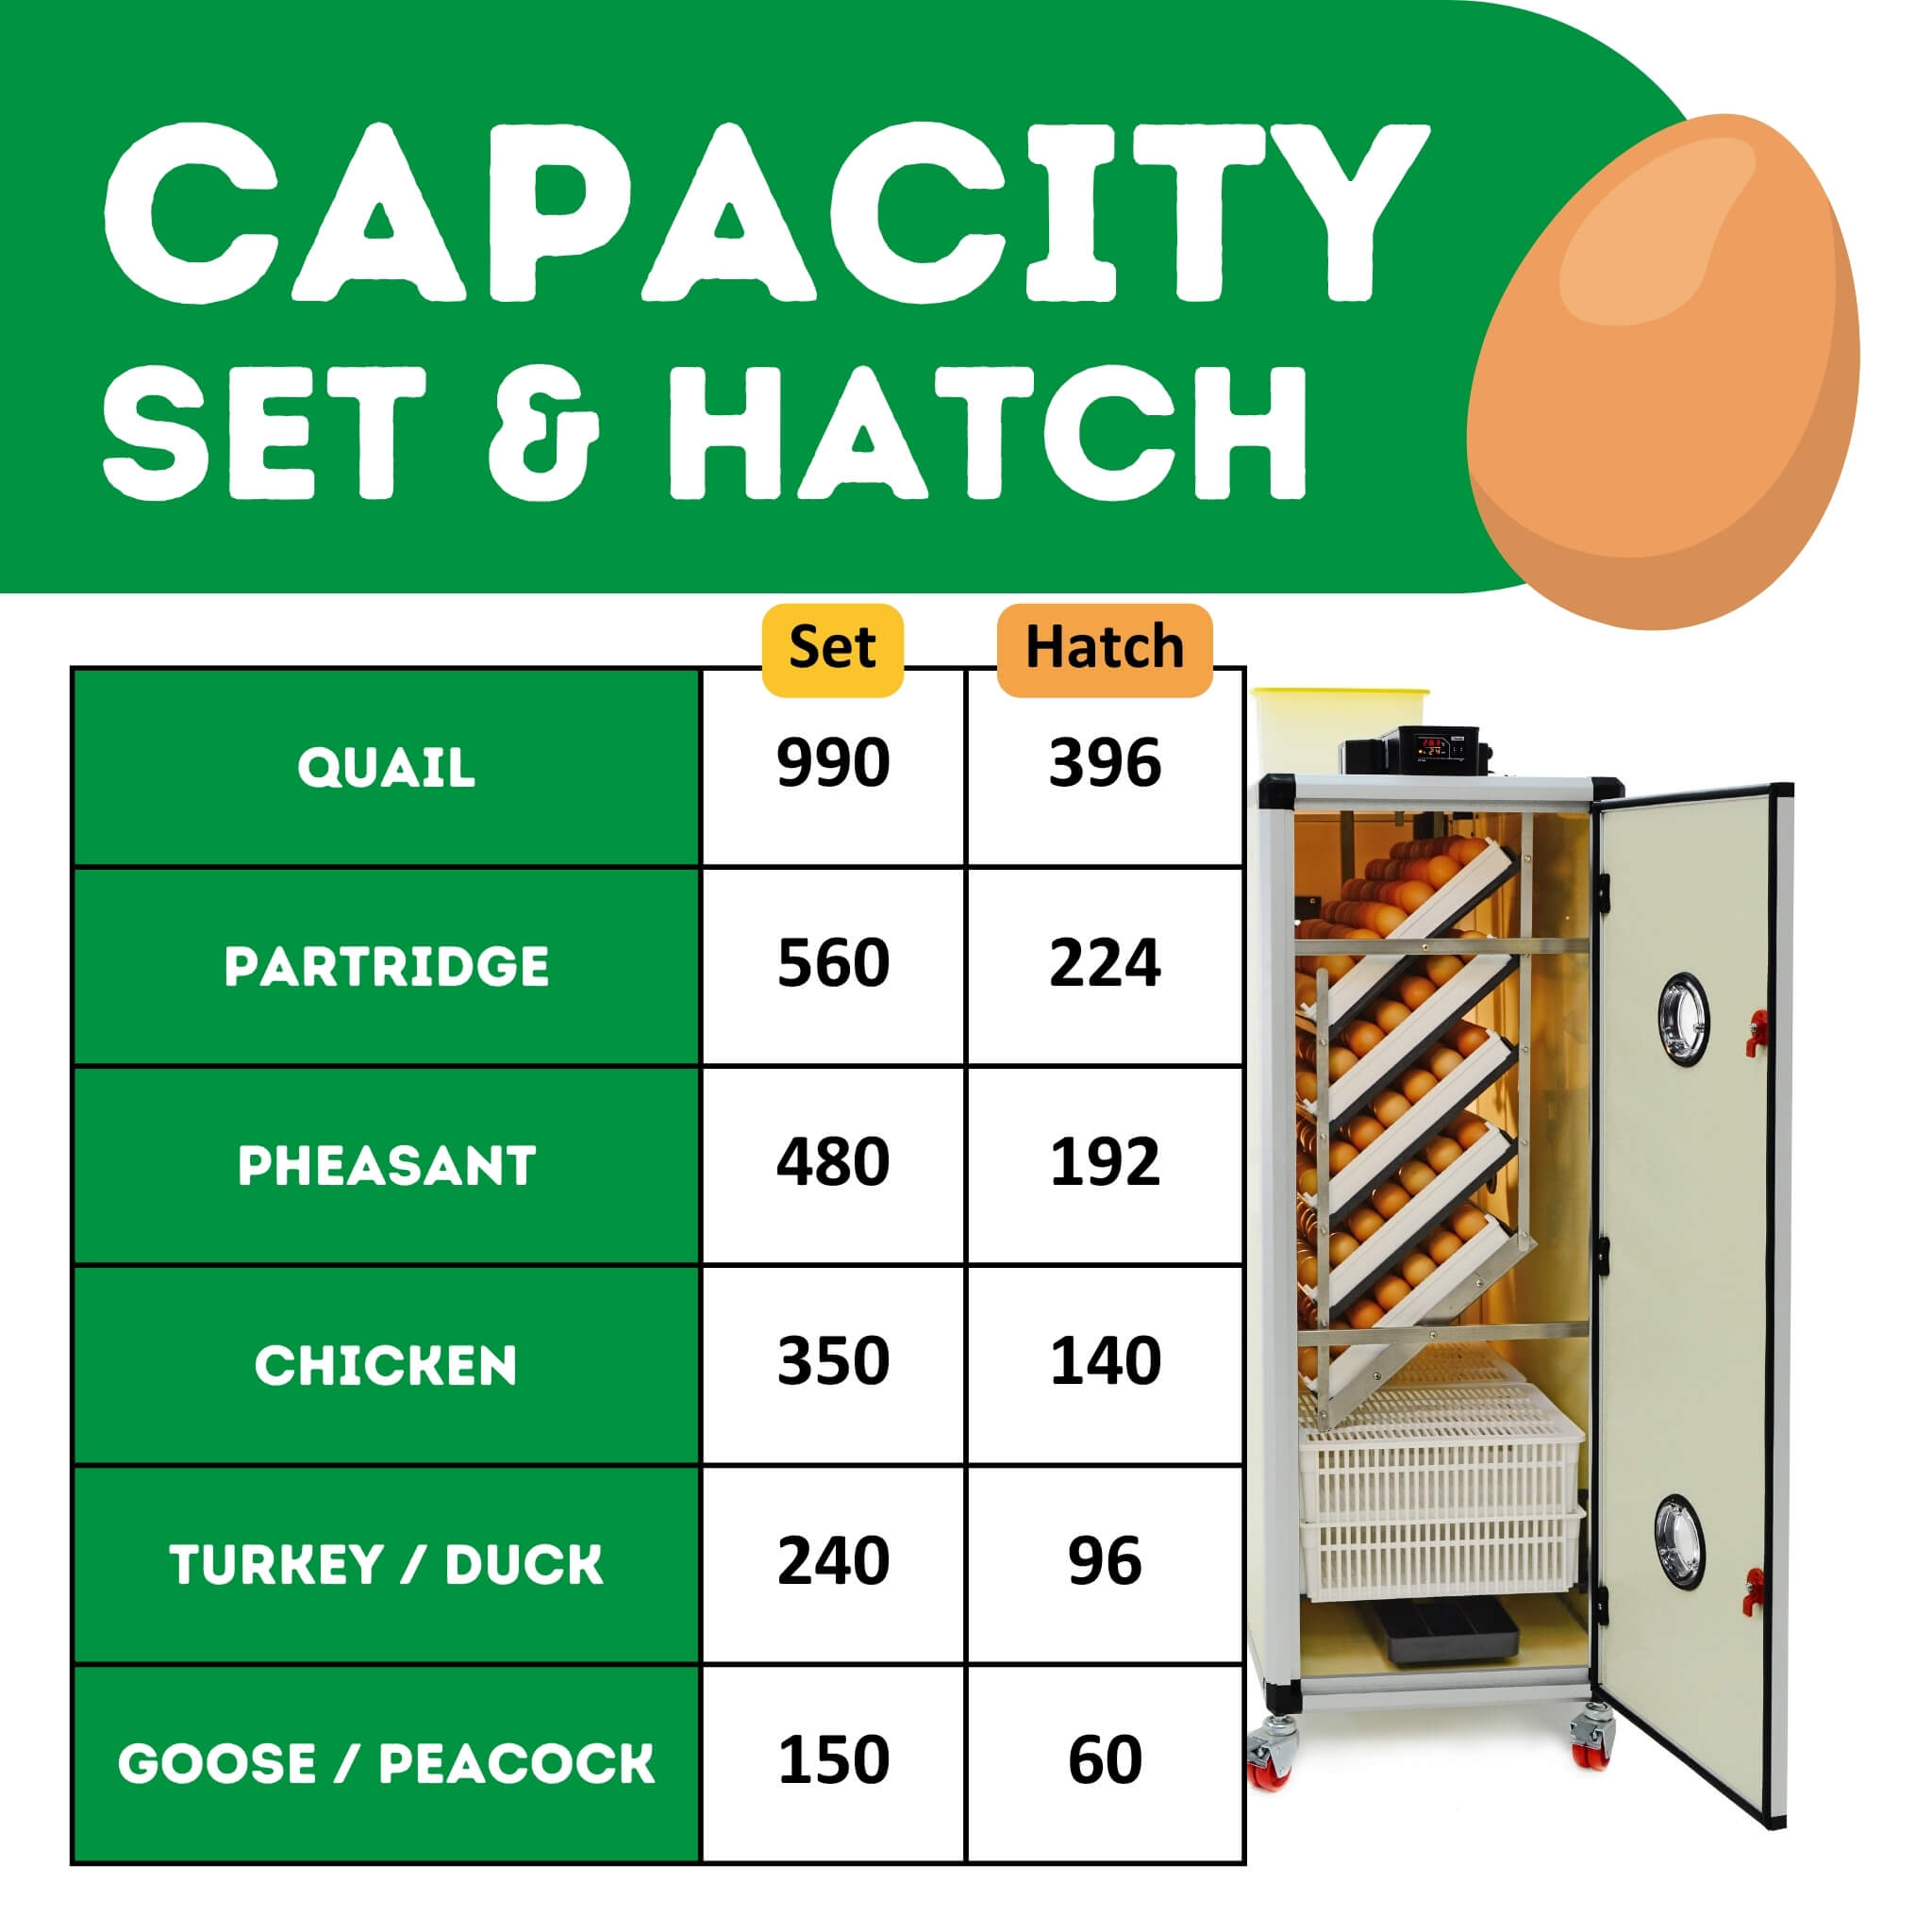 Hatching Time Cimuka. Infographic showing the different types of poultry eggs that can be incubated inside. Quail, partridge, pheasant, chicken, turkey, duck, goose and peacock eggs are listed.